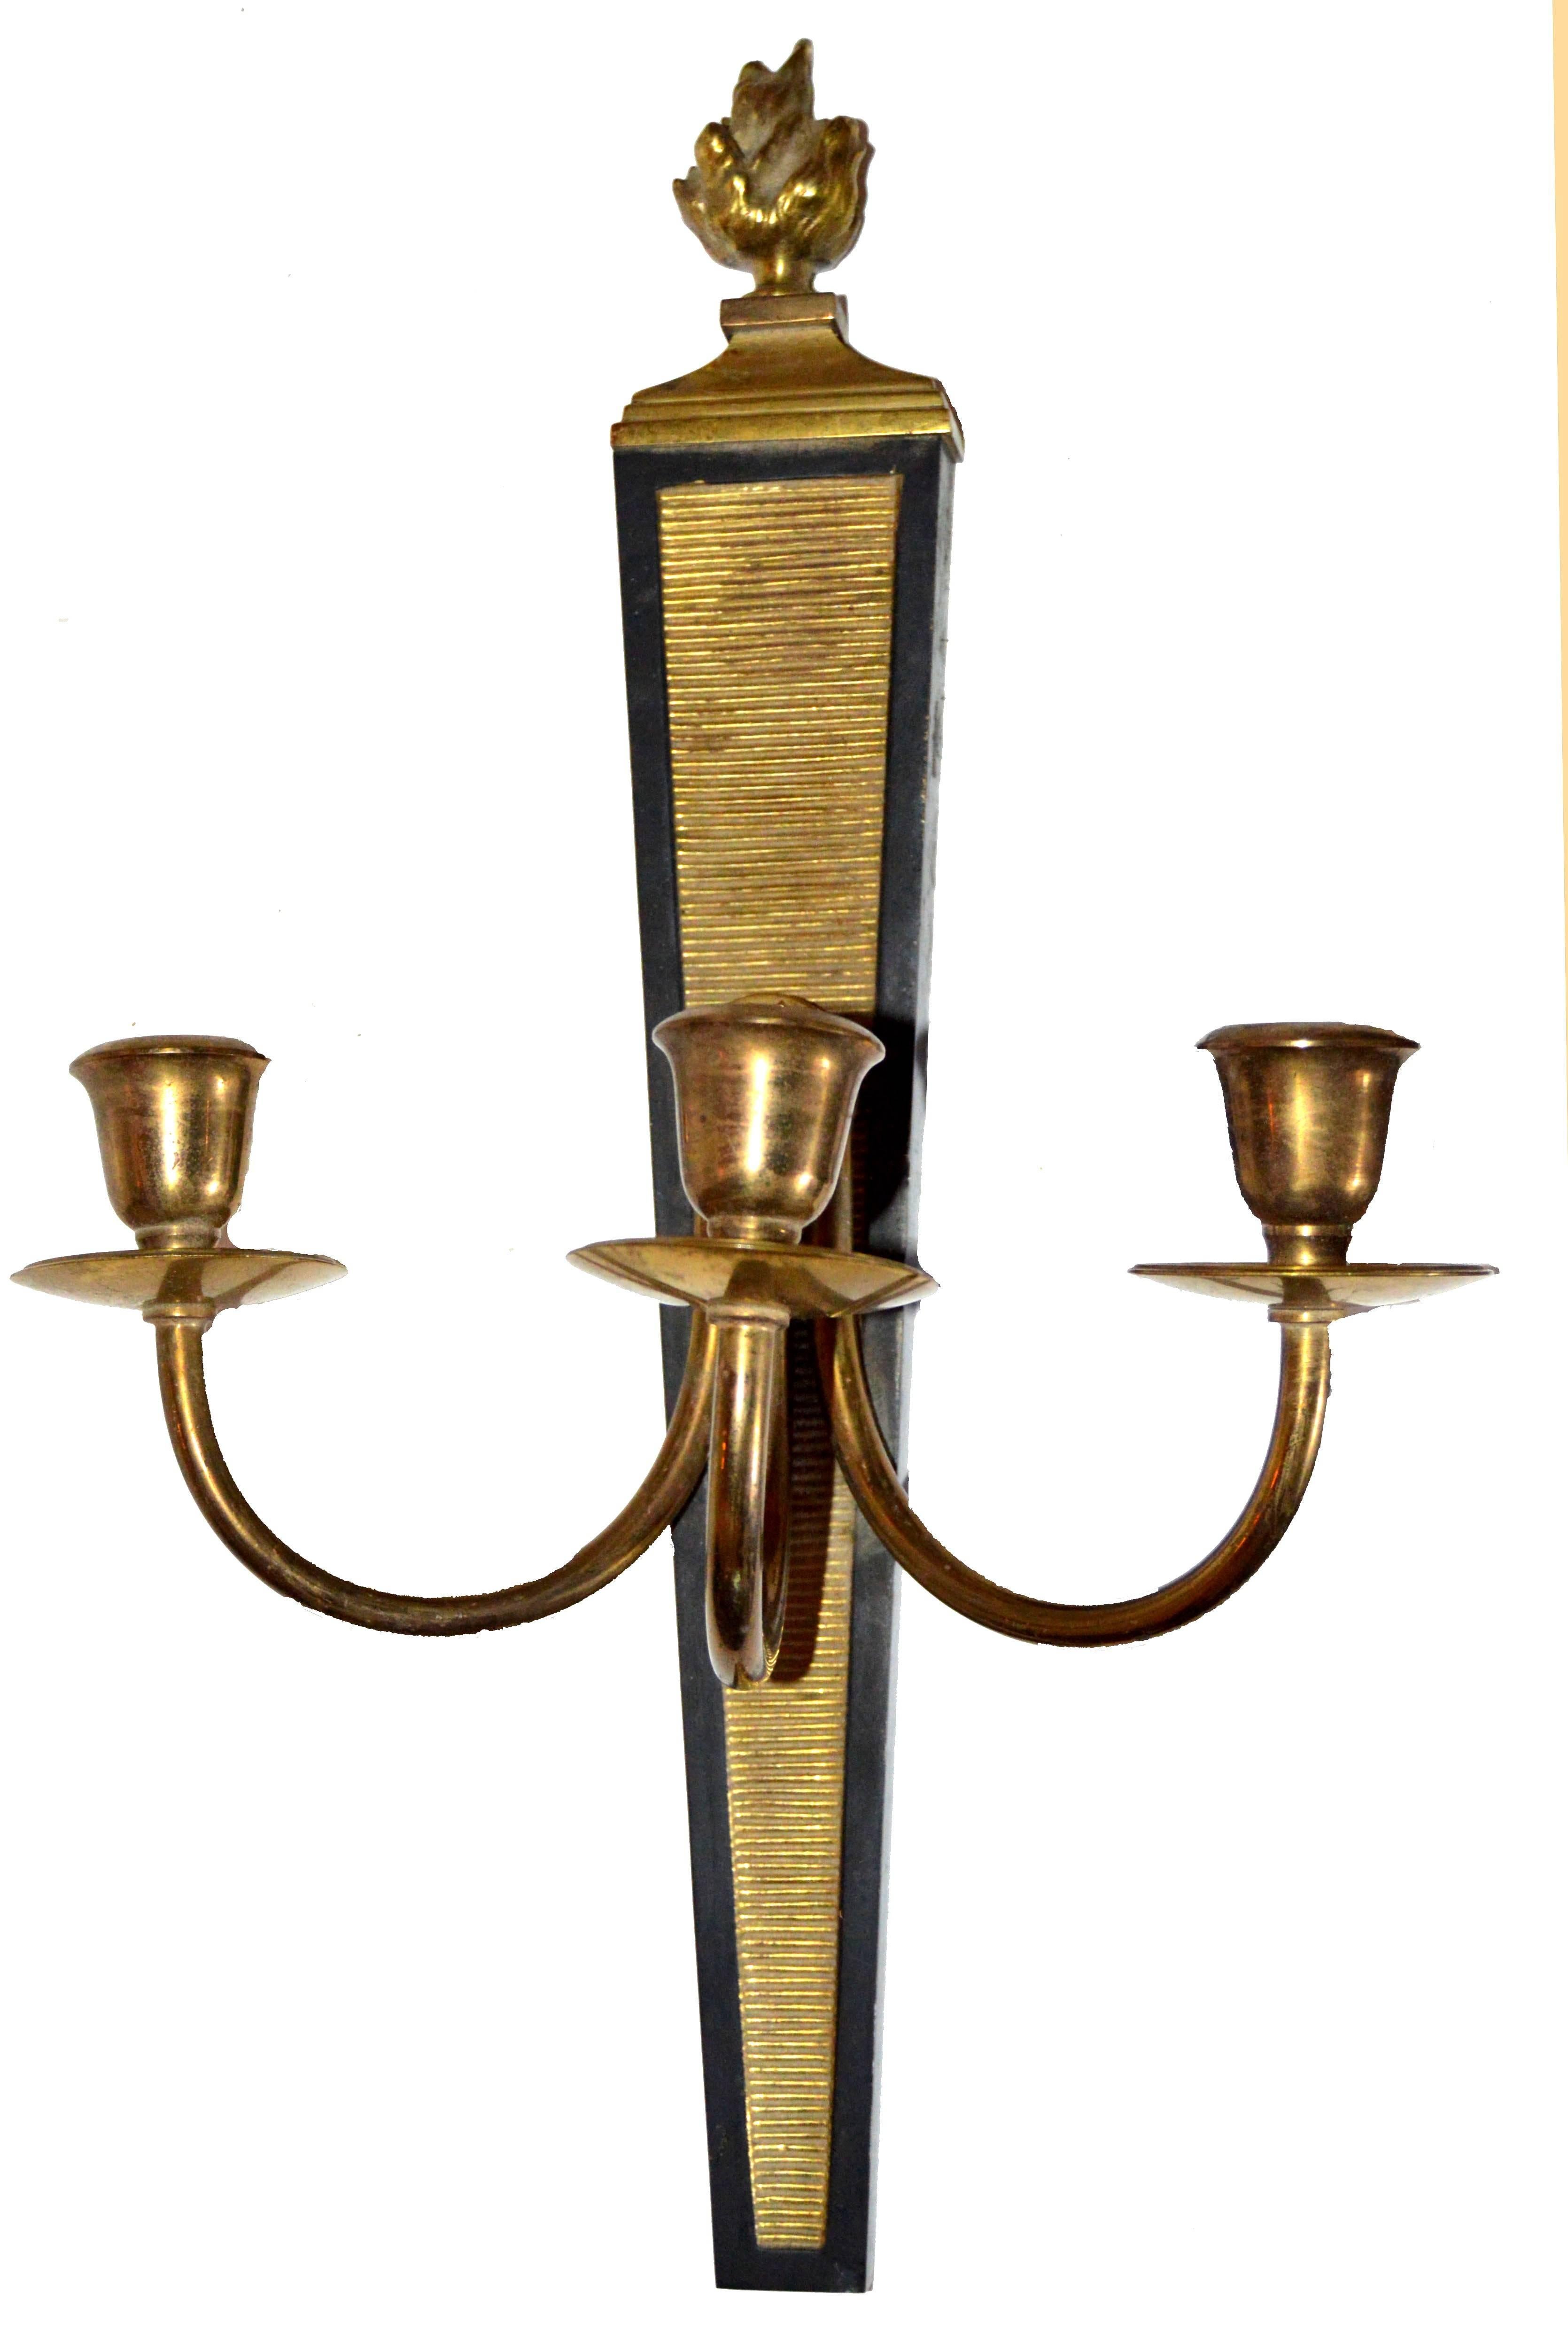 Superb pair of three arms bronze sconces by André Arbus.
US rewired and in working condition.
Three lights, 60 watts max per bulb.
Have a look on our impressive collection of French and Italian Mid Century  Period  Sconces......More than 100